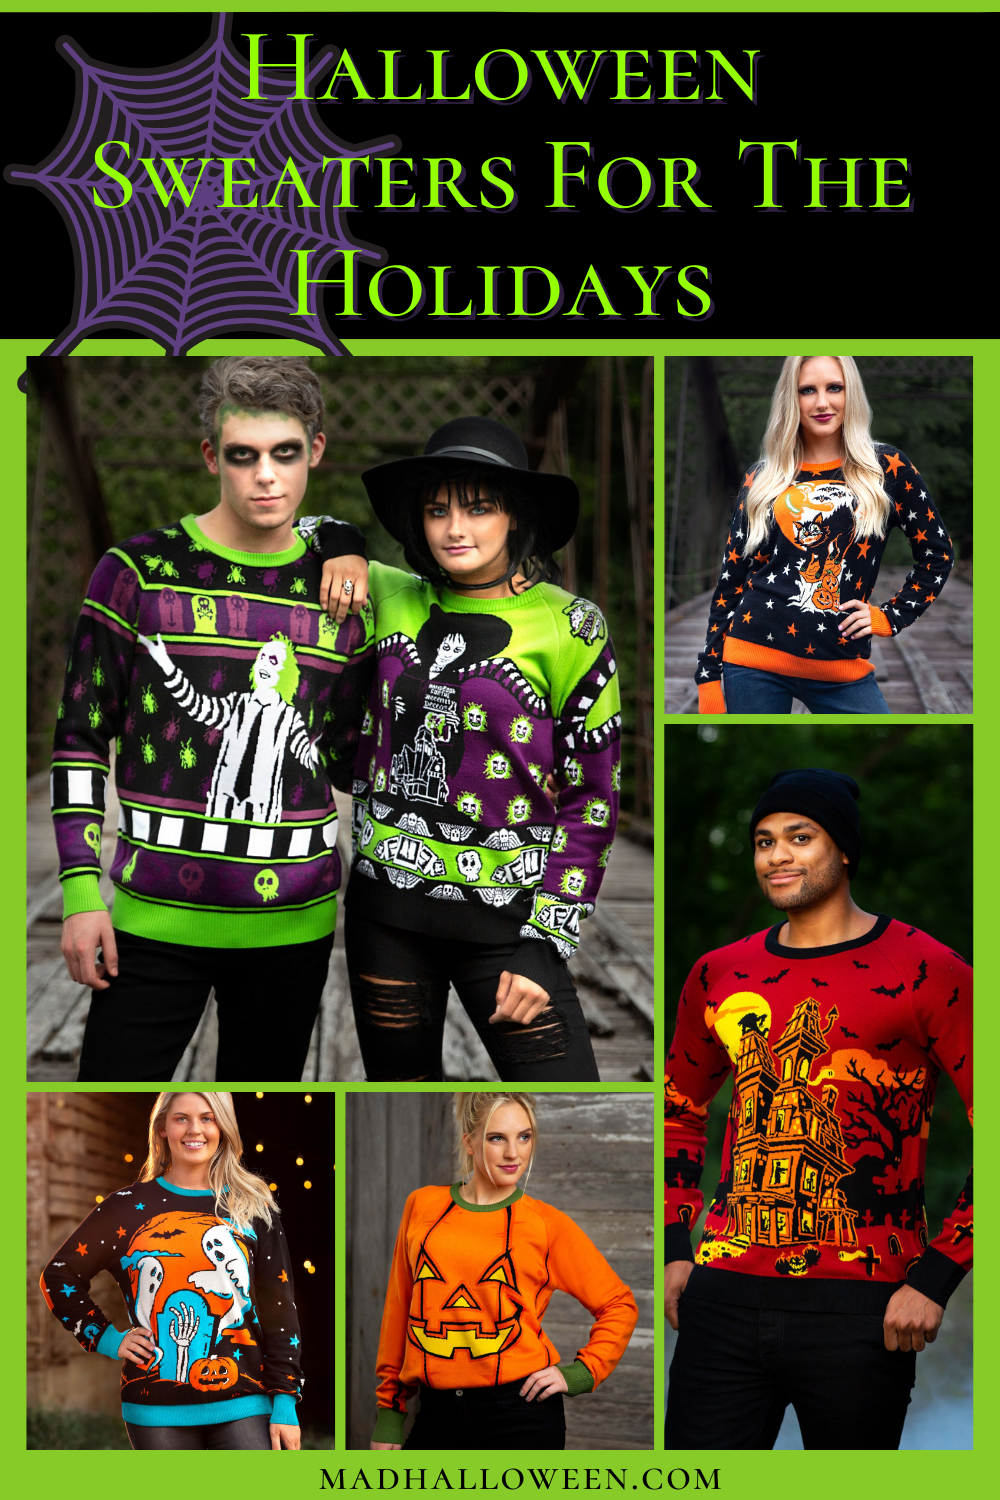 Halloween Sweaters For The Holidays - Mad Halloween